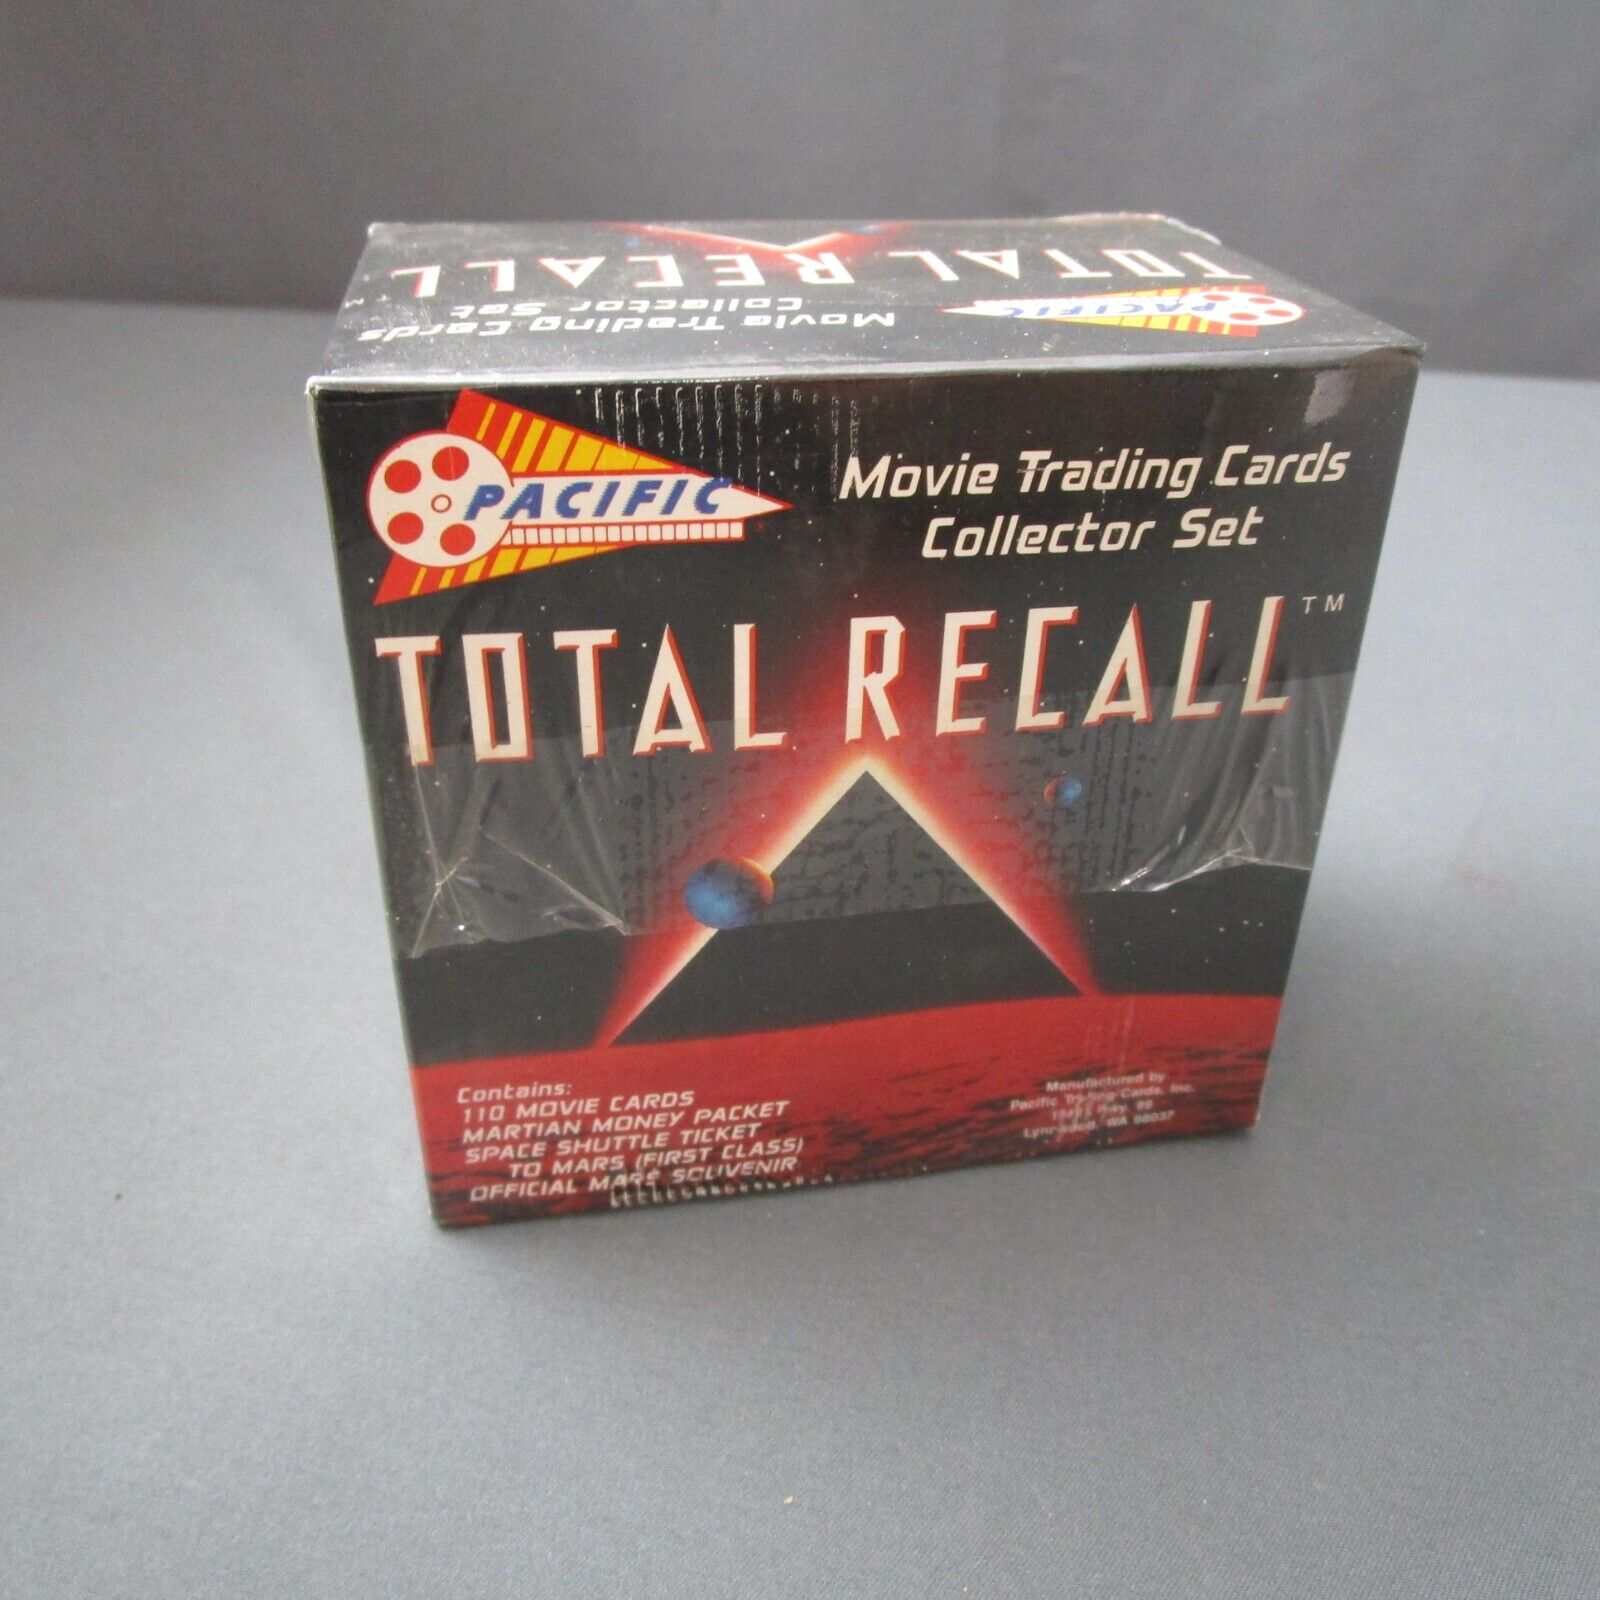 1990 TOTAL RECALL Movie Trading Card Collector Set, Bonus Items In SEALED BOX